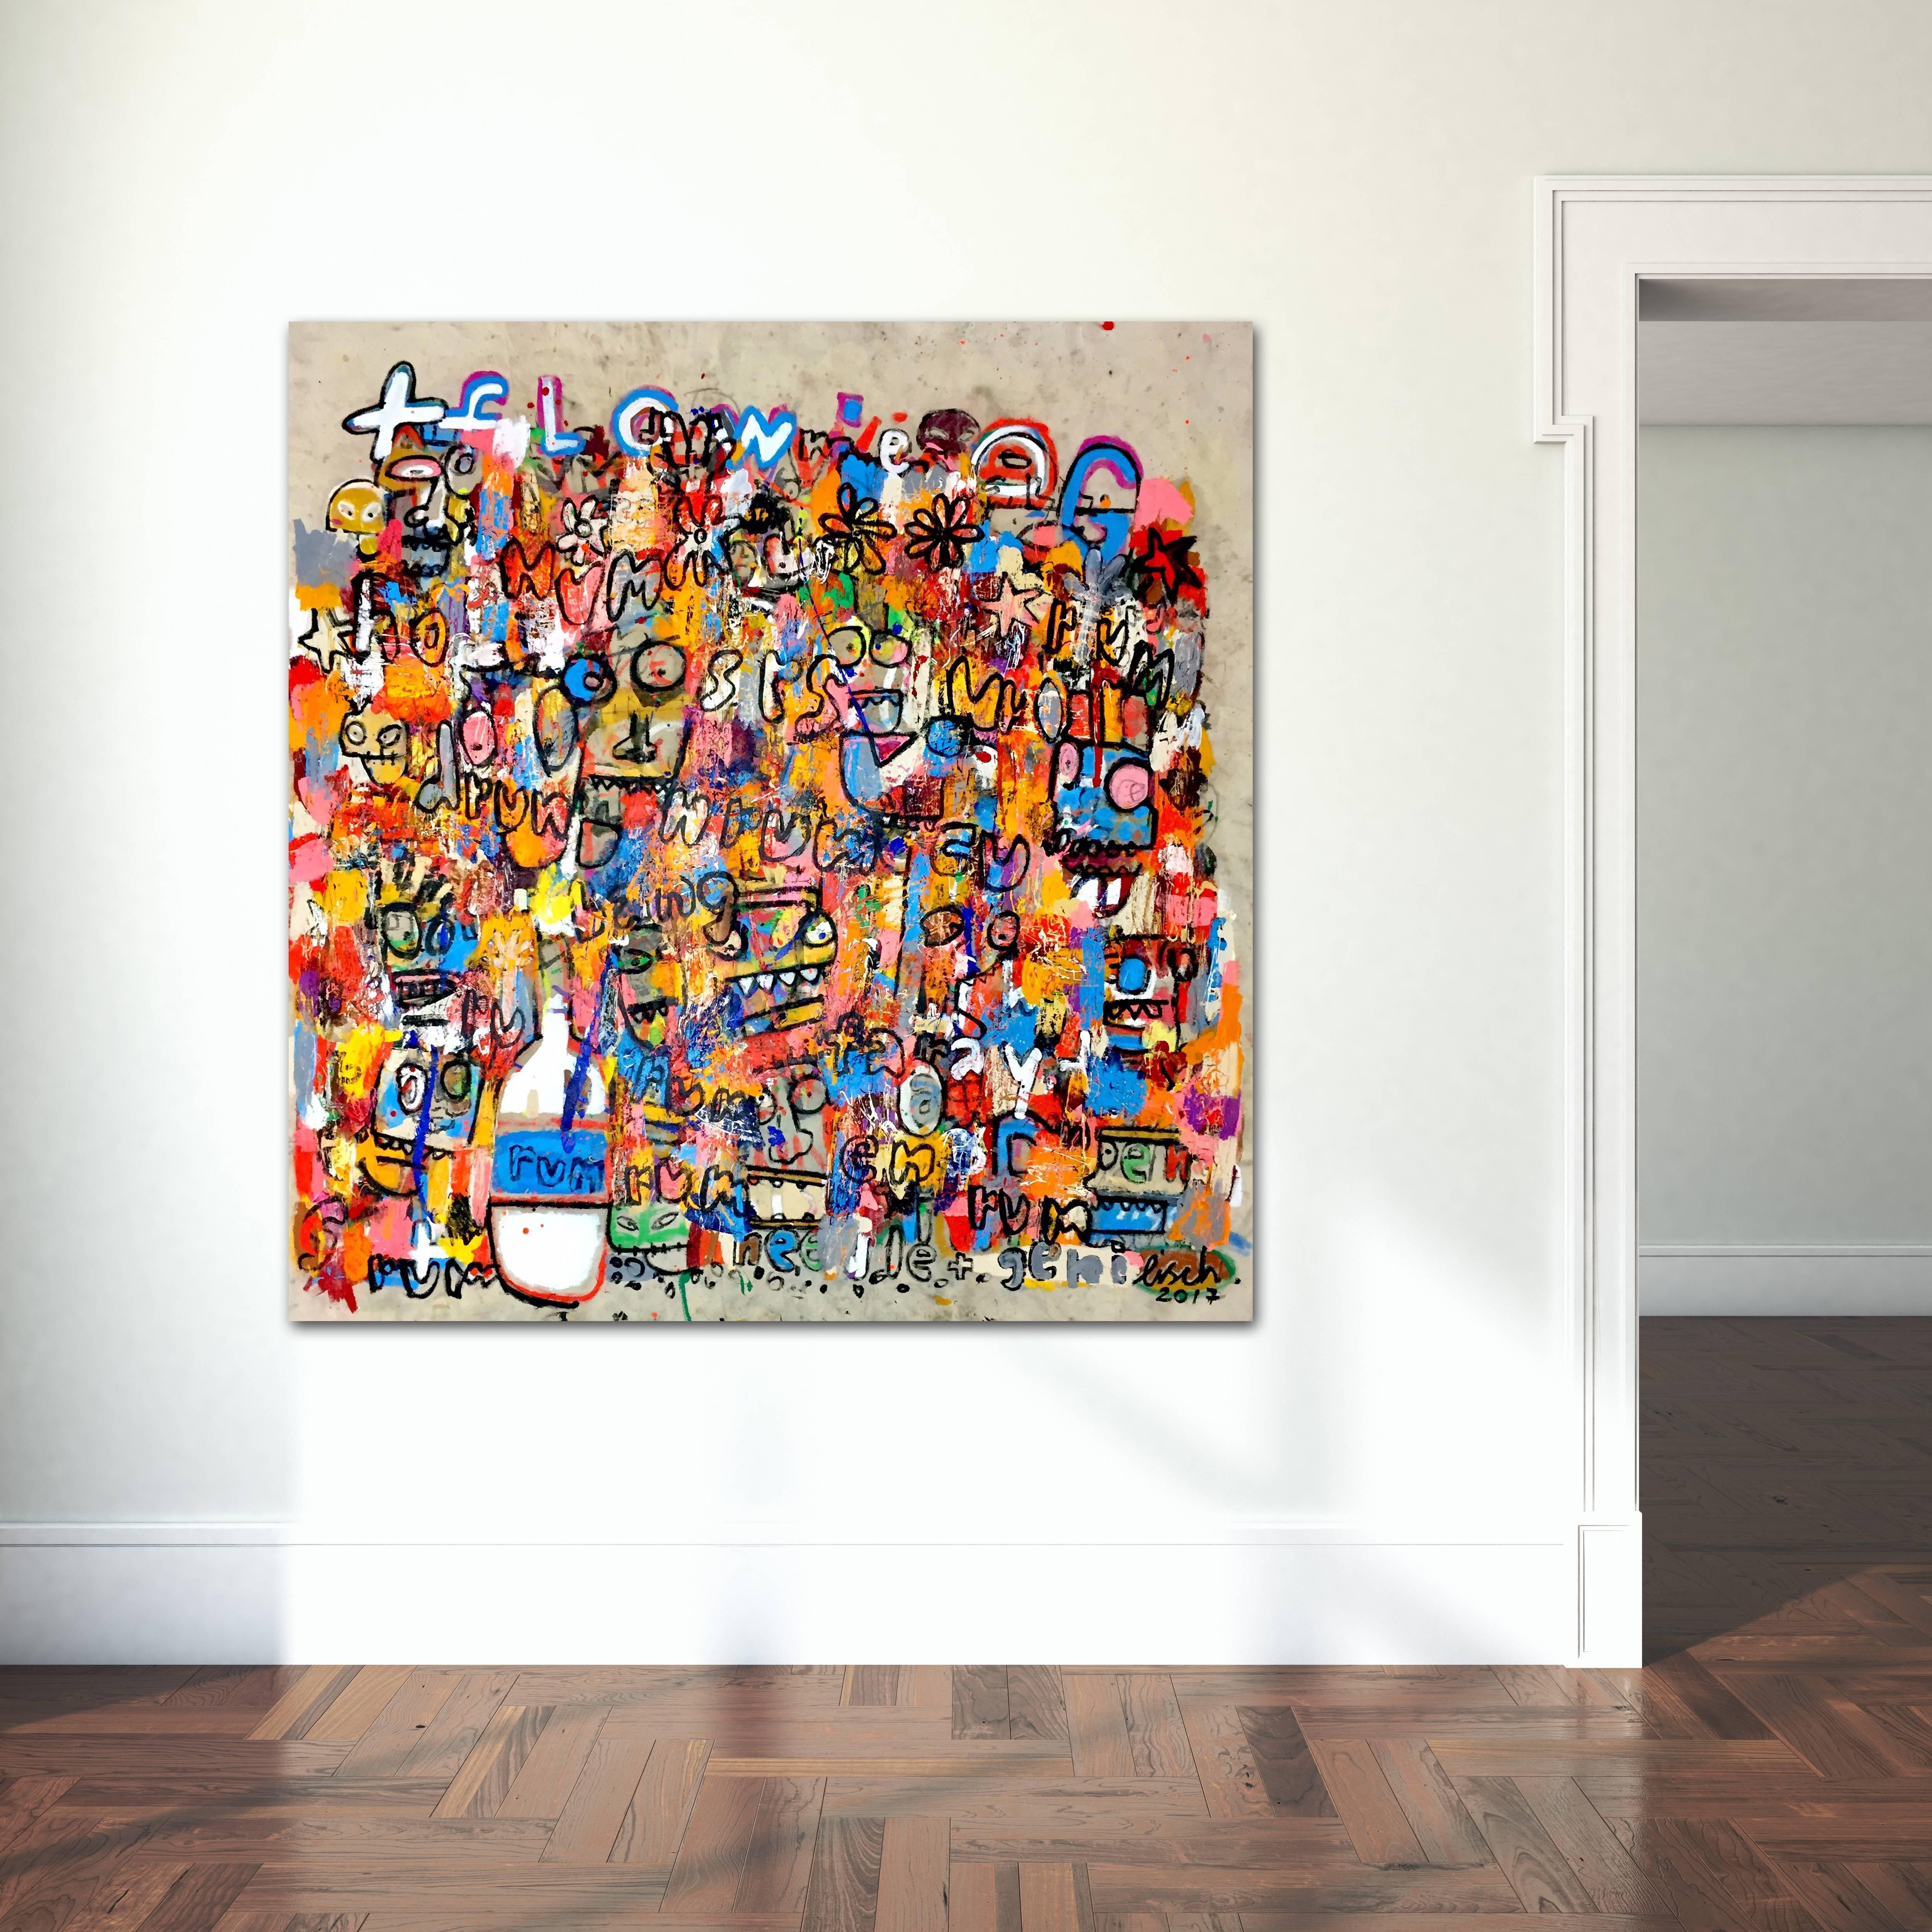 Swedish artist Jonas Fisch’s imagery is vibrantly buzzing with colorful commentary on society, past and present, morphed into figures, words and shapes. His heavily layered canvases are the foundations of a new dialogue.

This 64 inch tall by 68